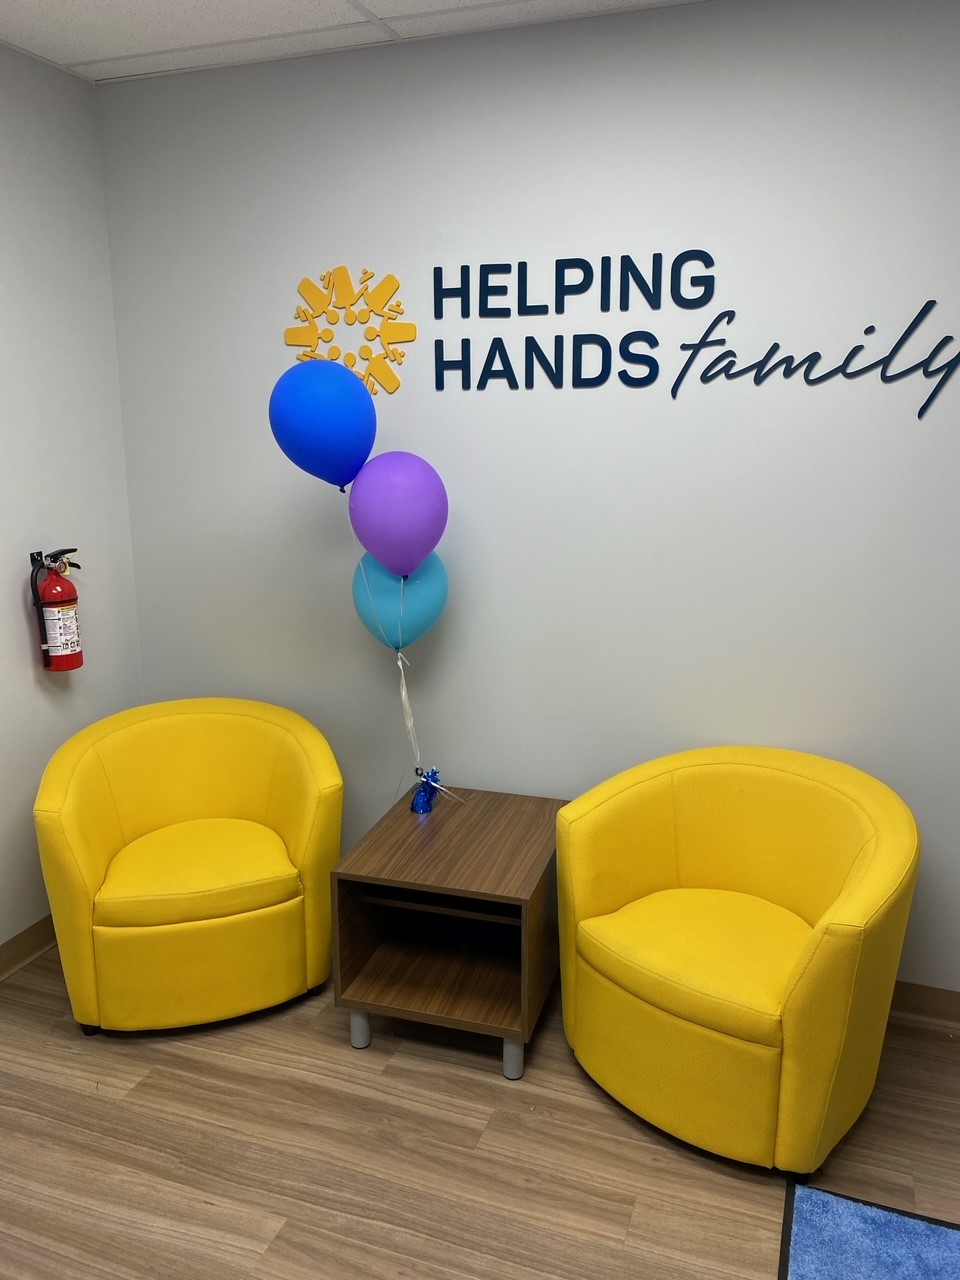 Helping Hands Family - ABA Therapy | 2003 Lower State Rd Suite 312, Doylestown, PA 18901 | Phone: (267) 327-4276